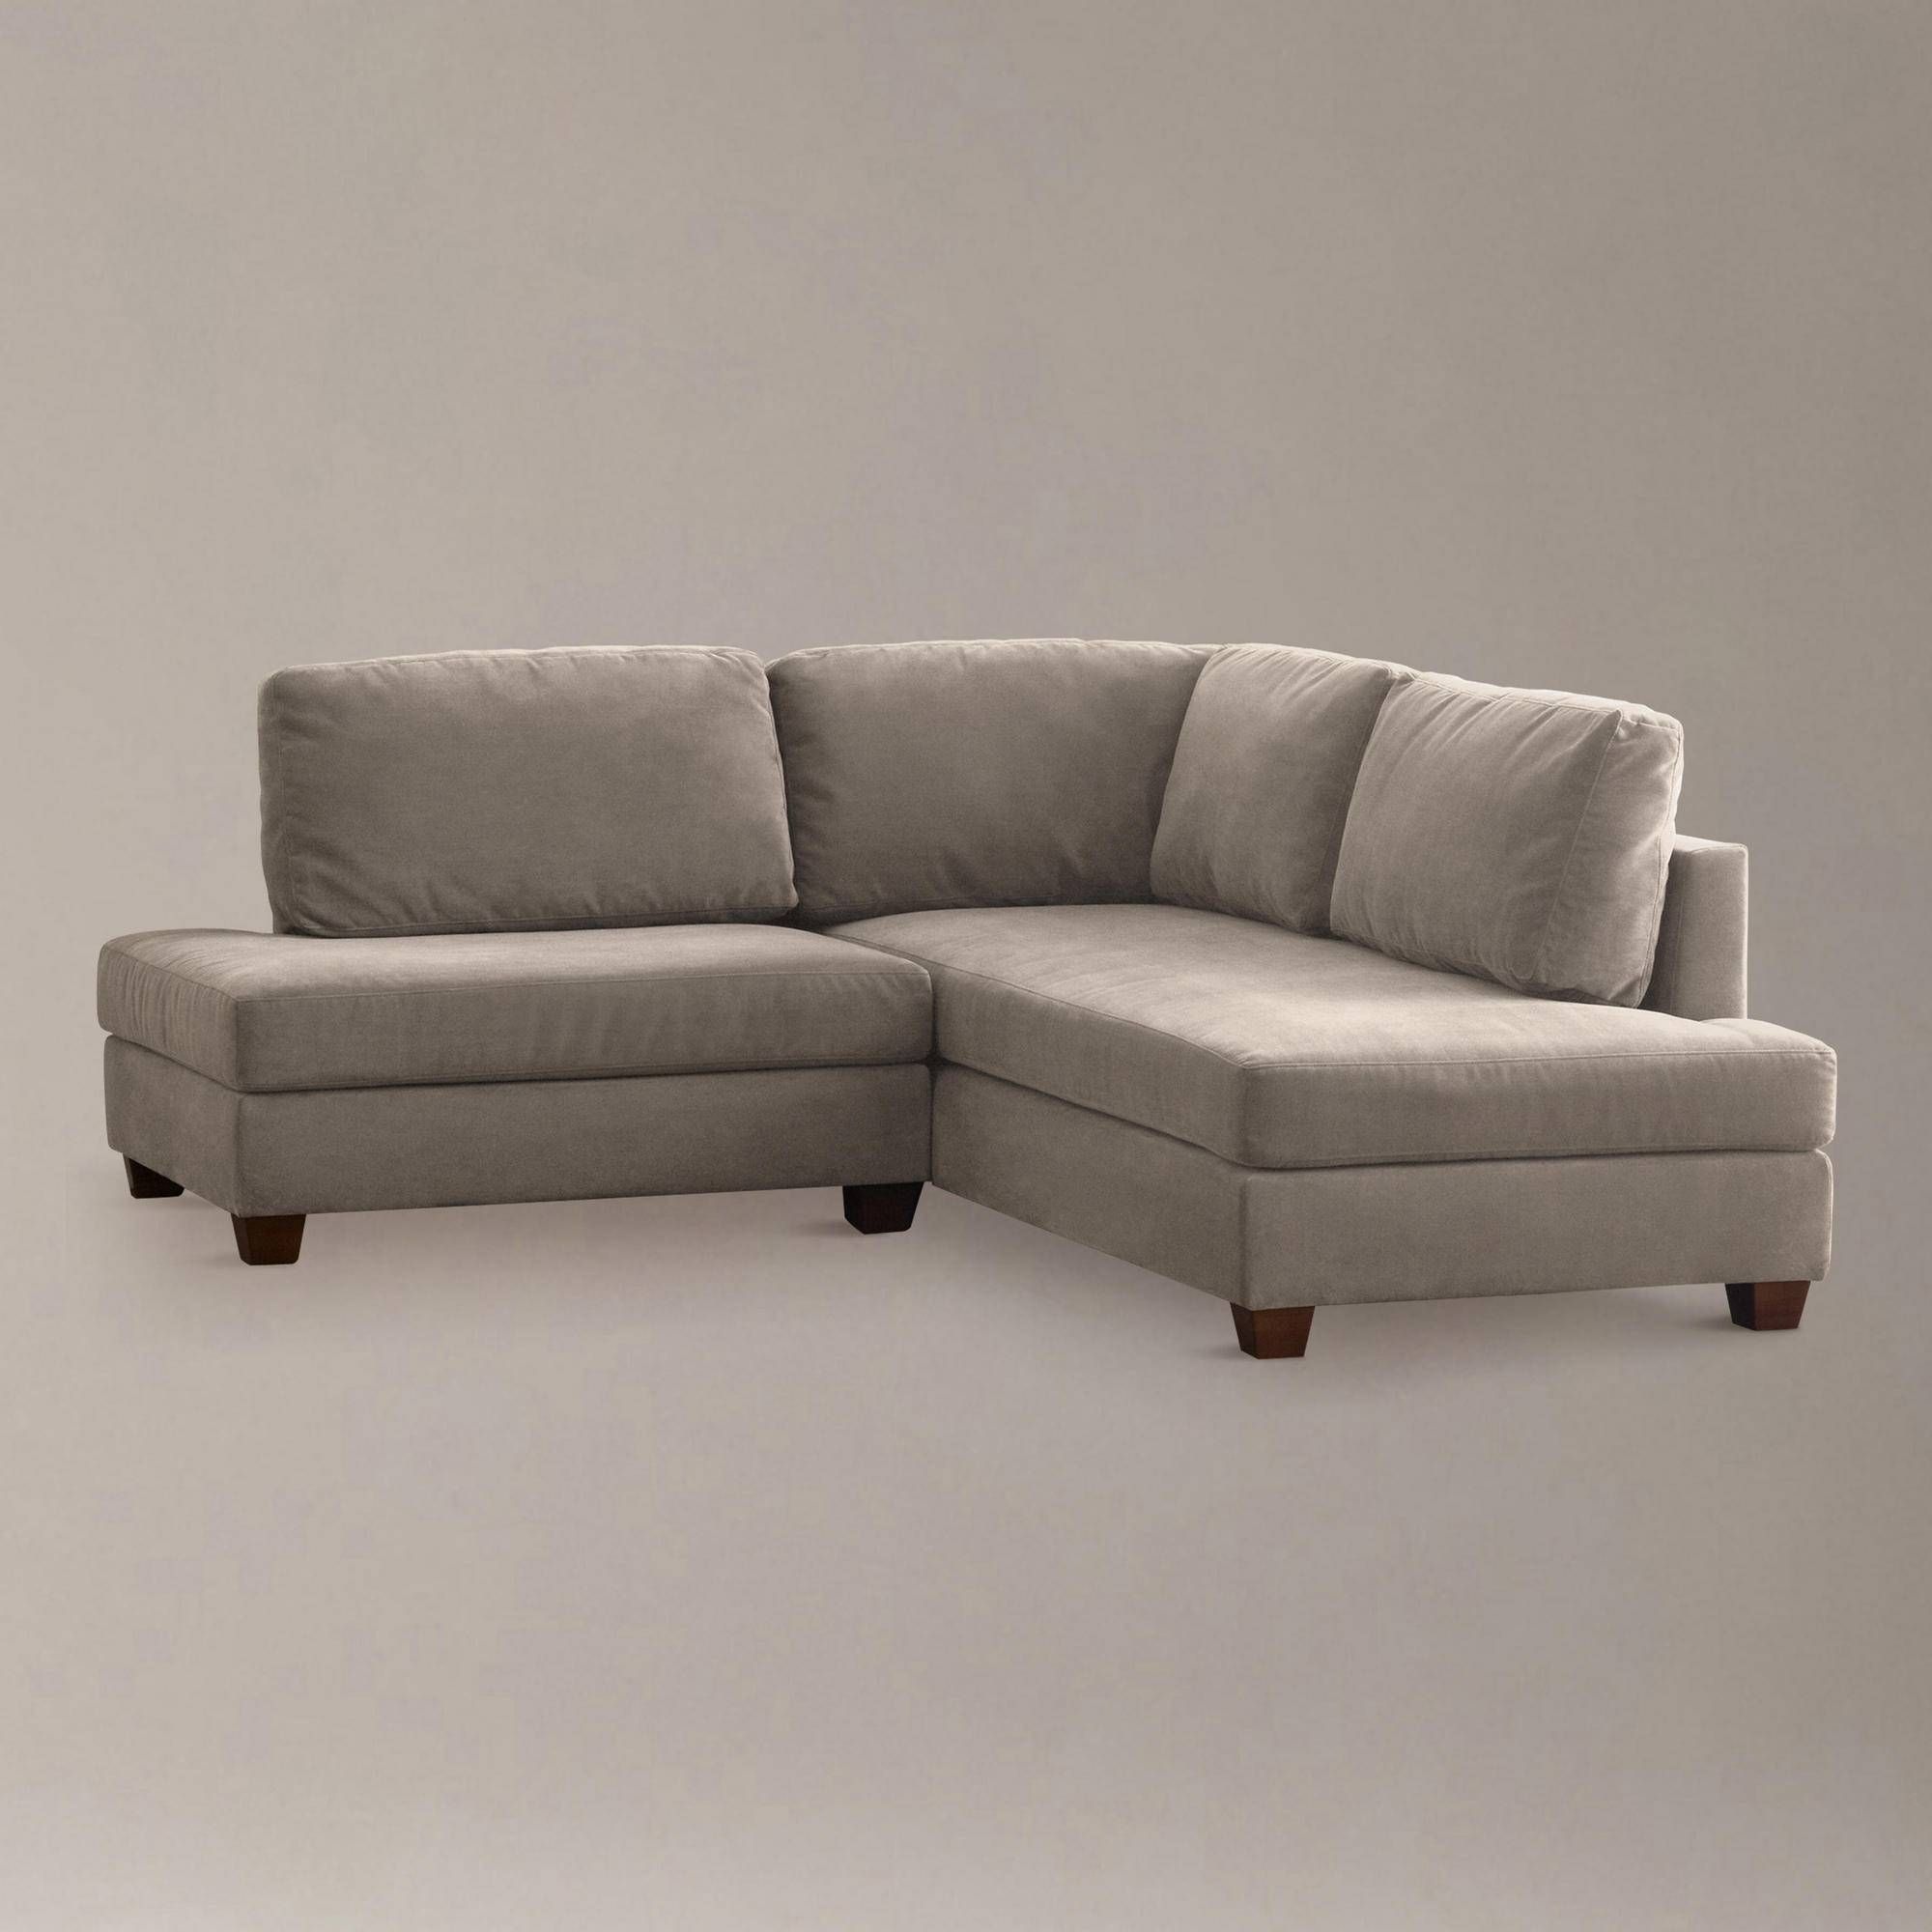 Furniture: Clearance Sectional Sofas For Elegant Living Room Within Discounted Sectional Sofa (View 26 of 30)